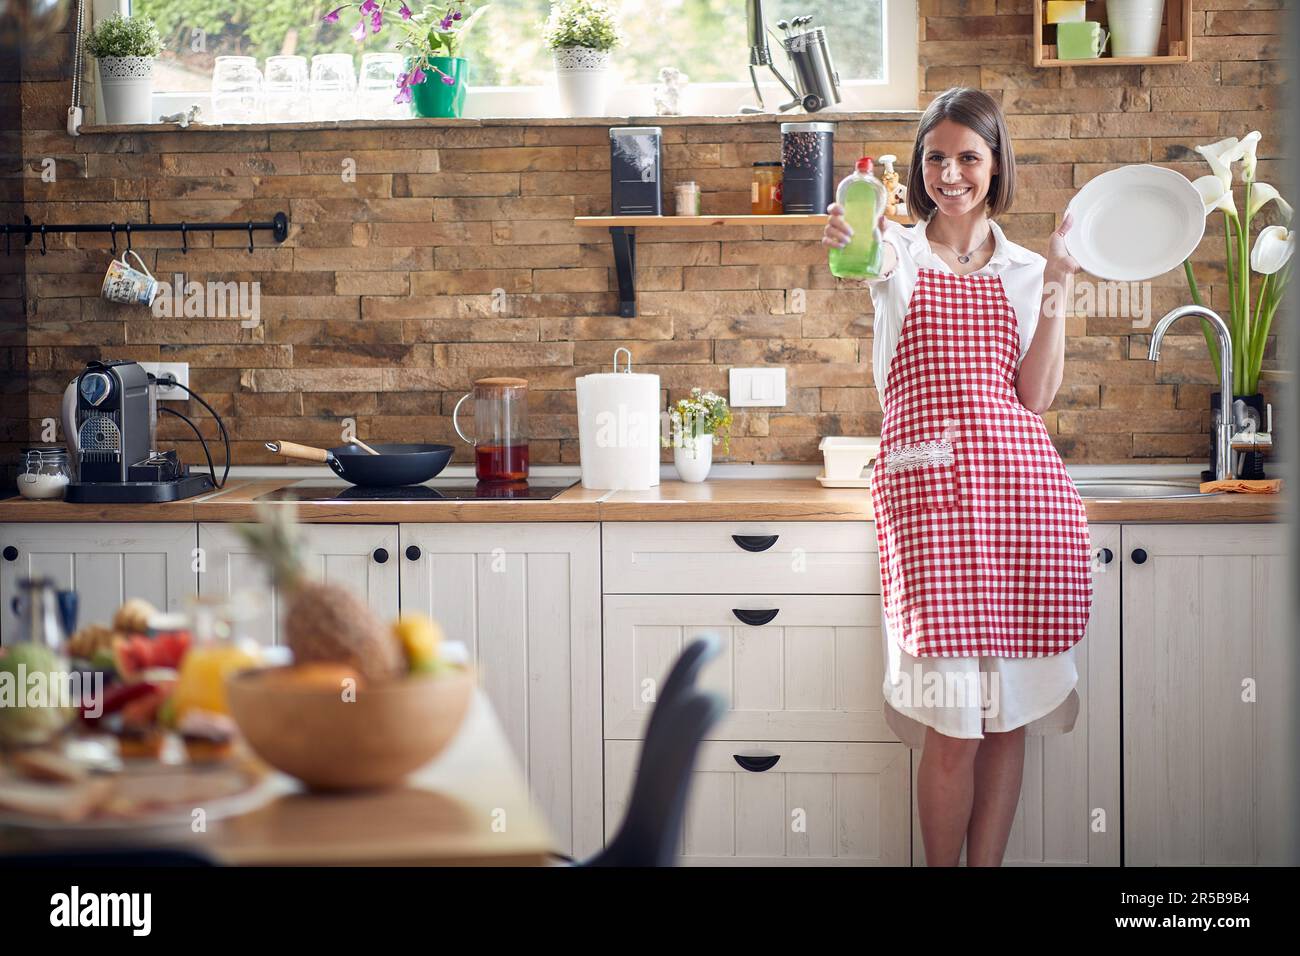 Happy woman stands in her kitchen, radiating joy as she embraces the transformative magic of our exceptional dish soap. Stock Photo